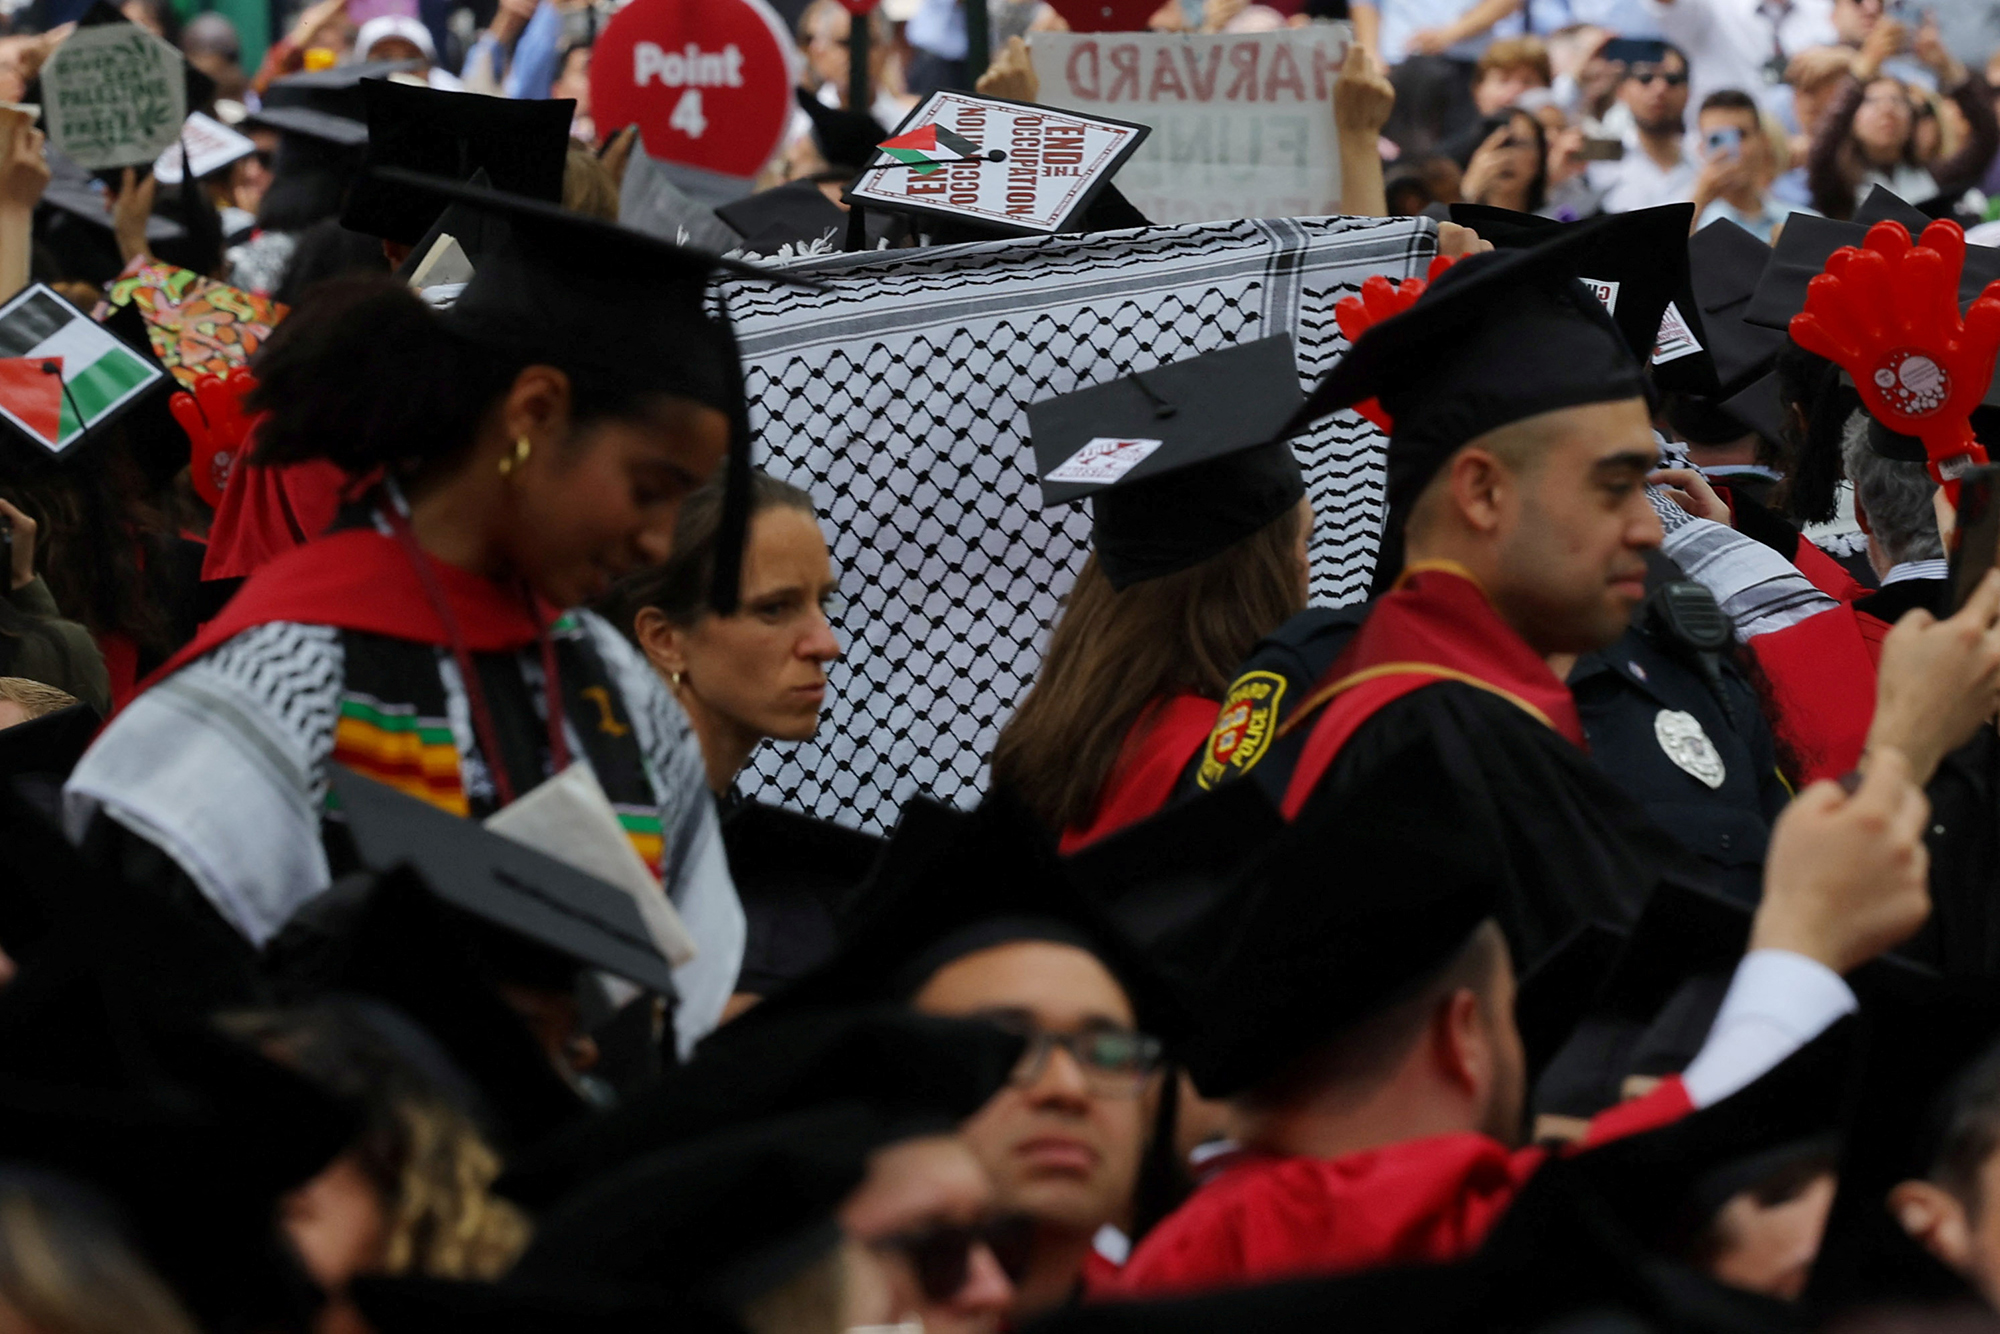 Graduating students walk out of the he 373rd Commencement Exercises at Harvard University in support of 13 students not able to graduate because of their participation in pro-Palestinian protests in Cambridge, Massachusetts, on May 23.